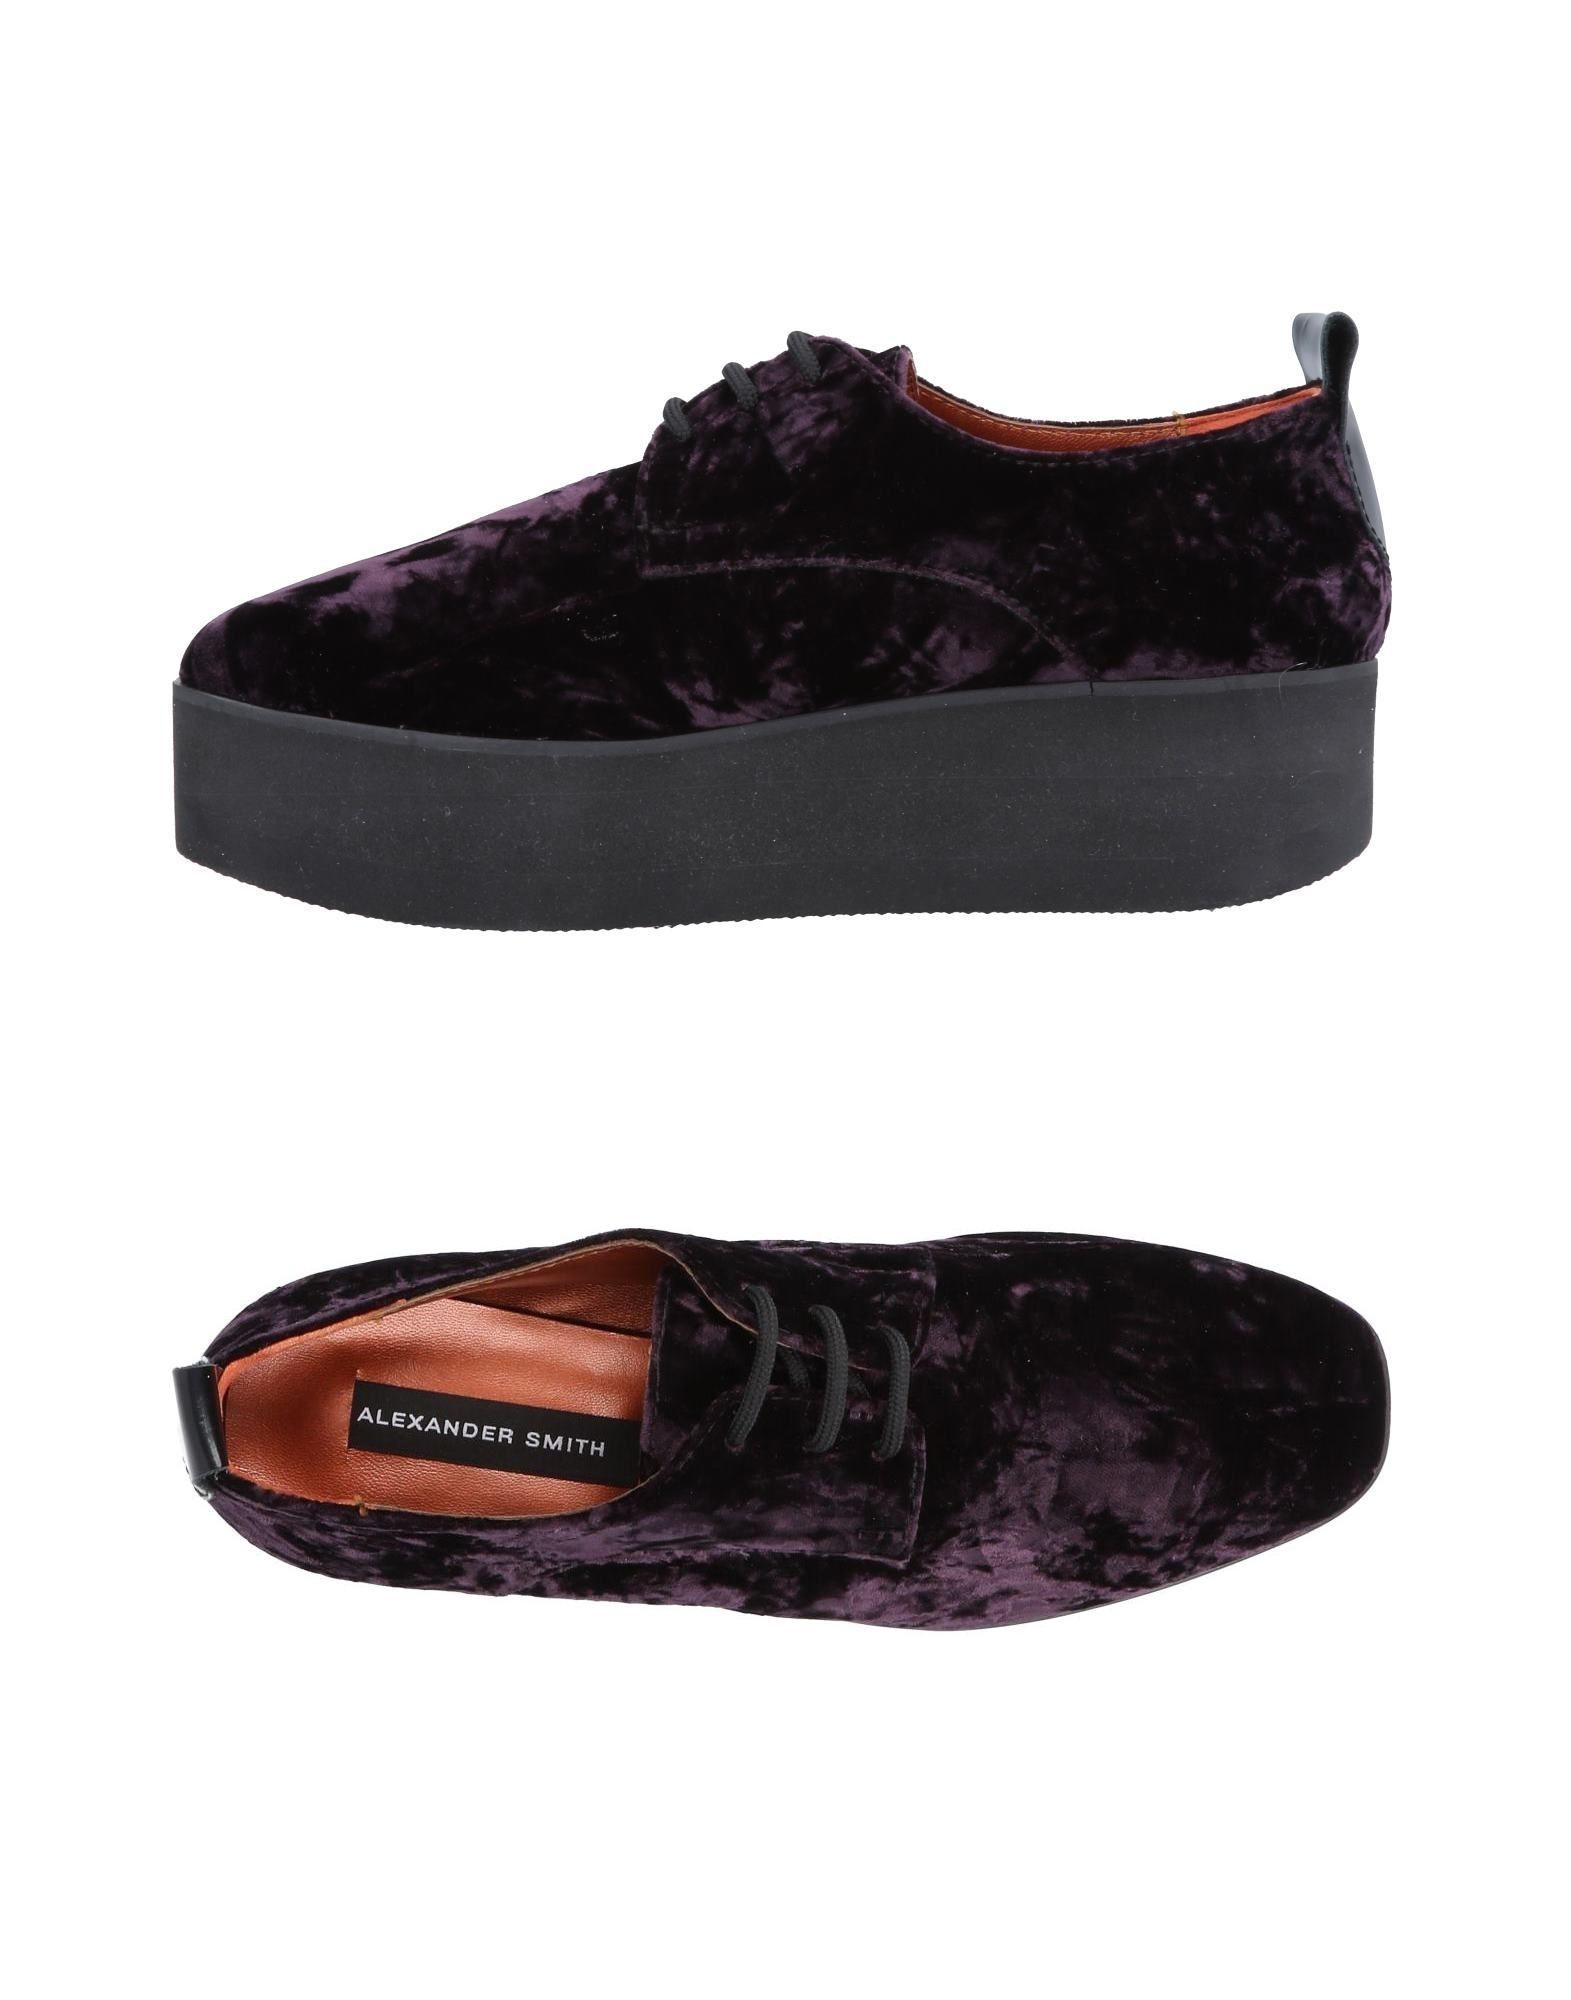 ALEXANDER SMITH Laced shoes,11501058DV 13